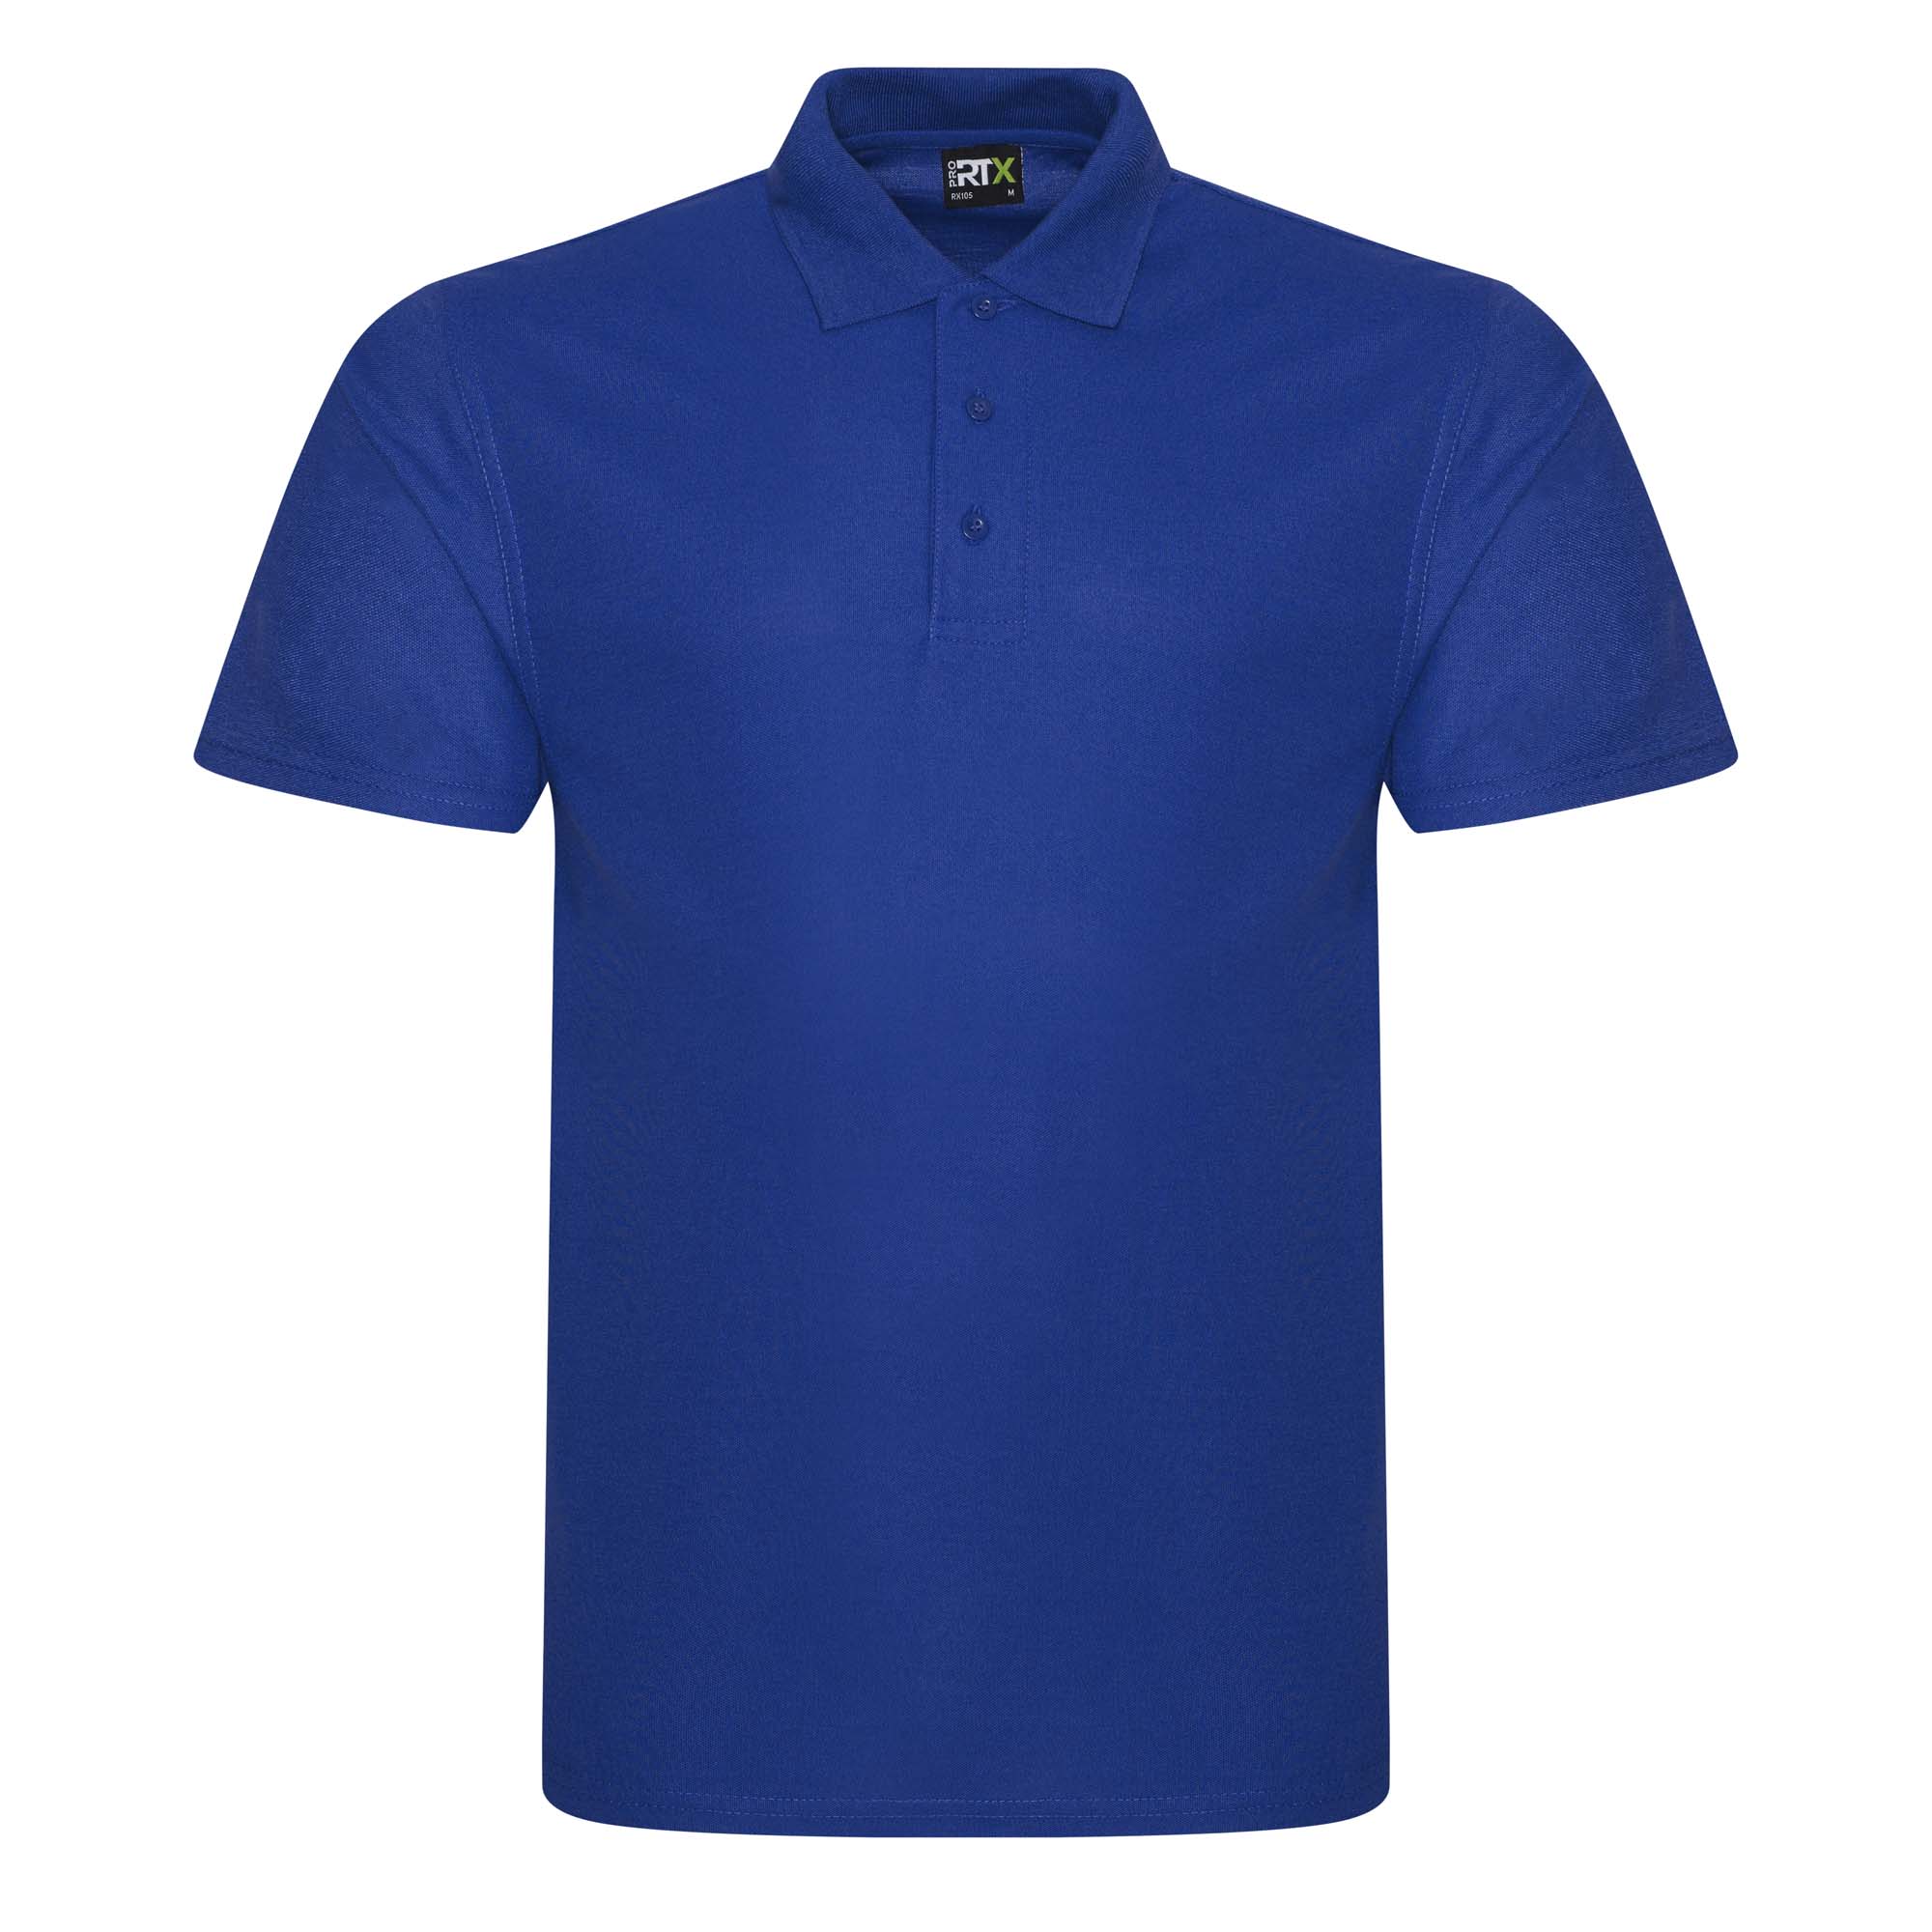 ax-httpswebsystems.s3.amazonaws.comtmp_for_downloadpro-rtx-pro-polyester-polo-royal.jpg